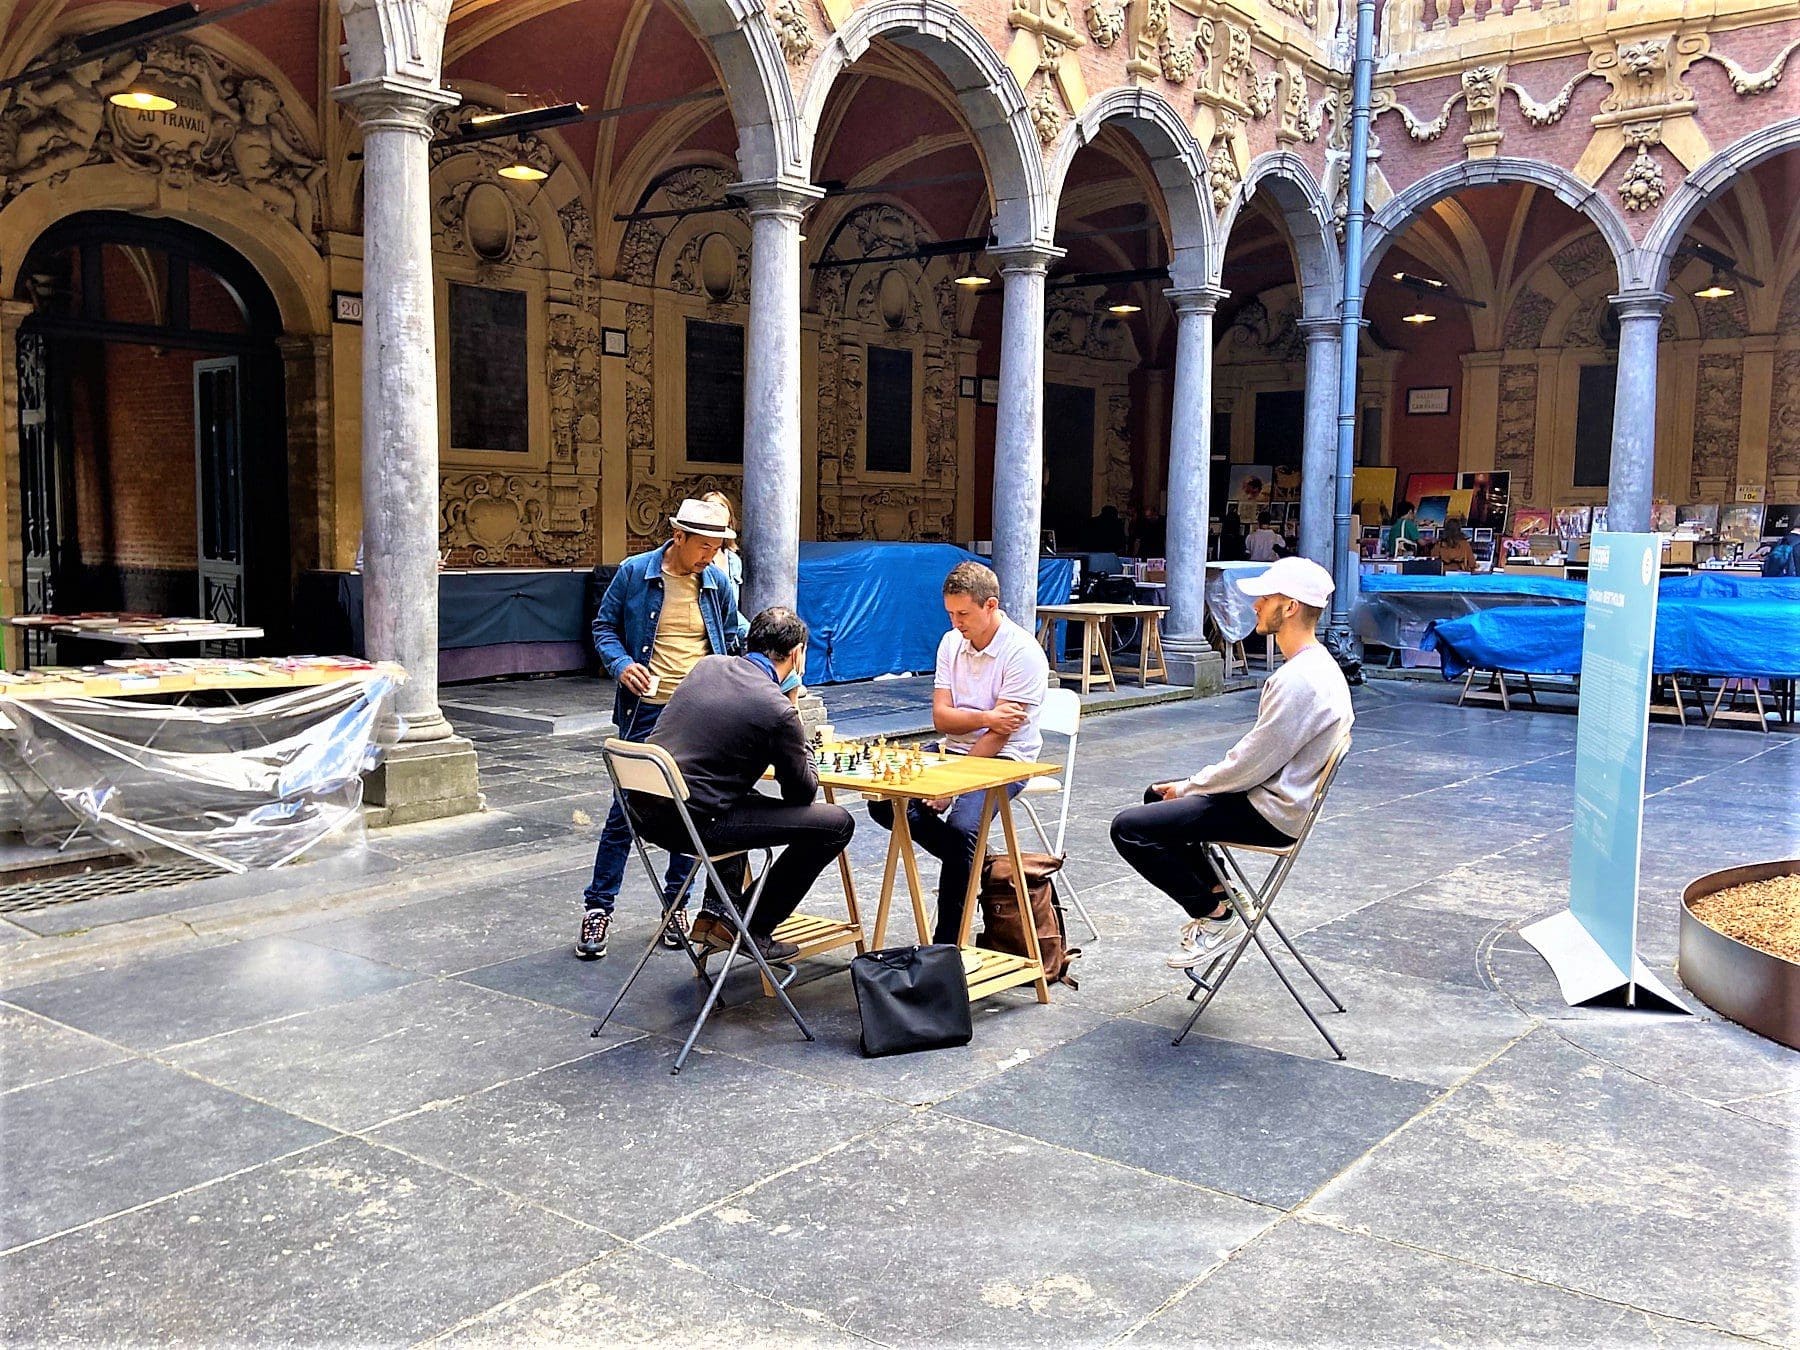 Men playing chess in the Bourse